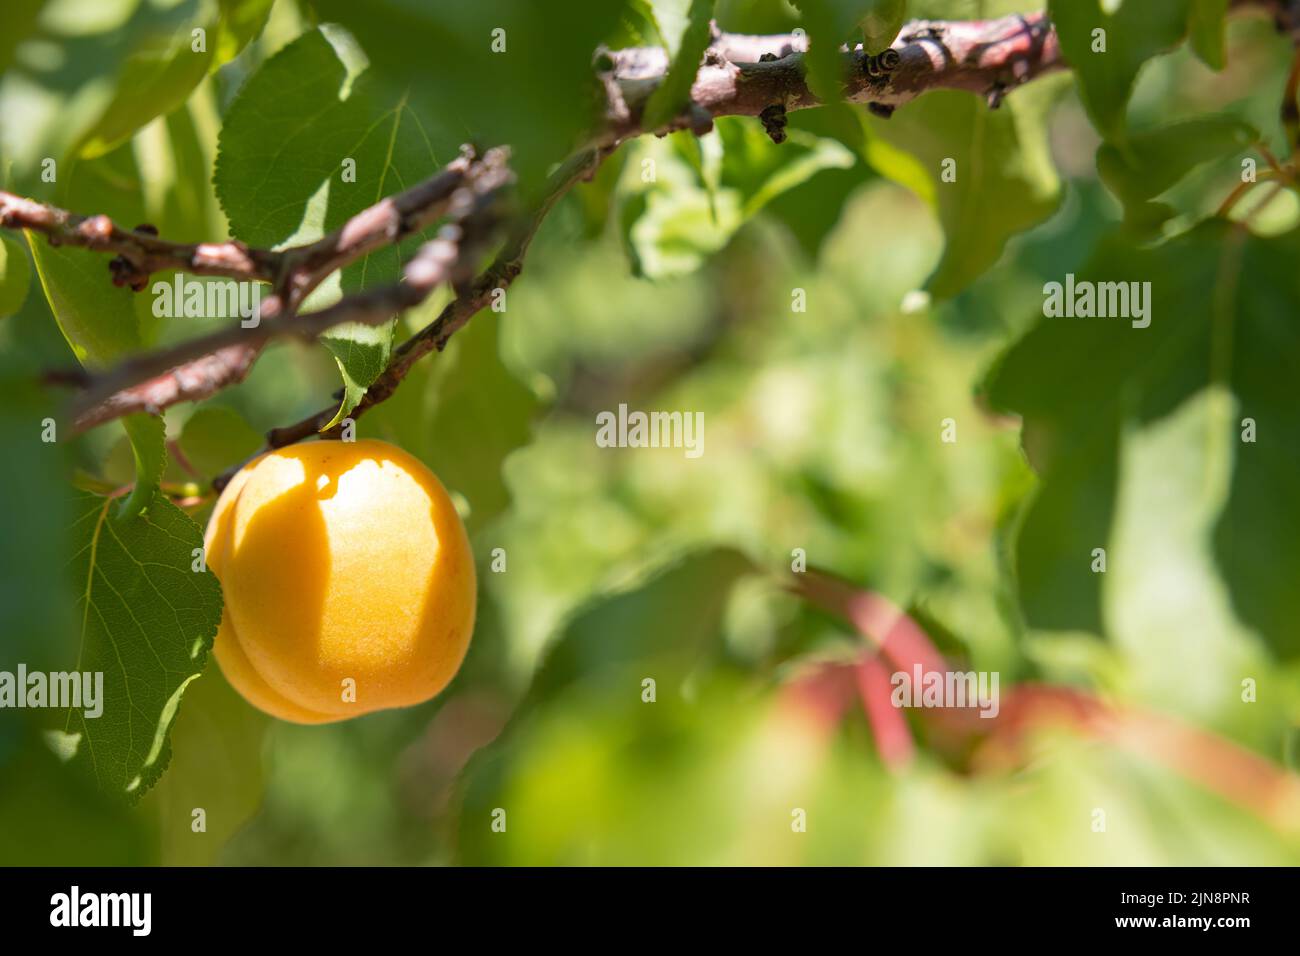 Apricots. An apricot on the branch in focus. Organic raw fruits background photo. Stock Photo